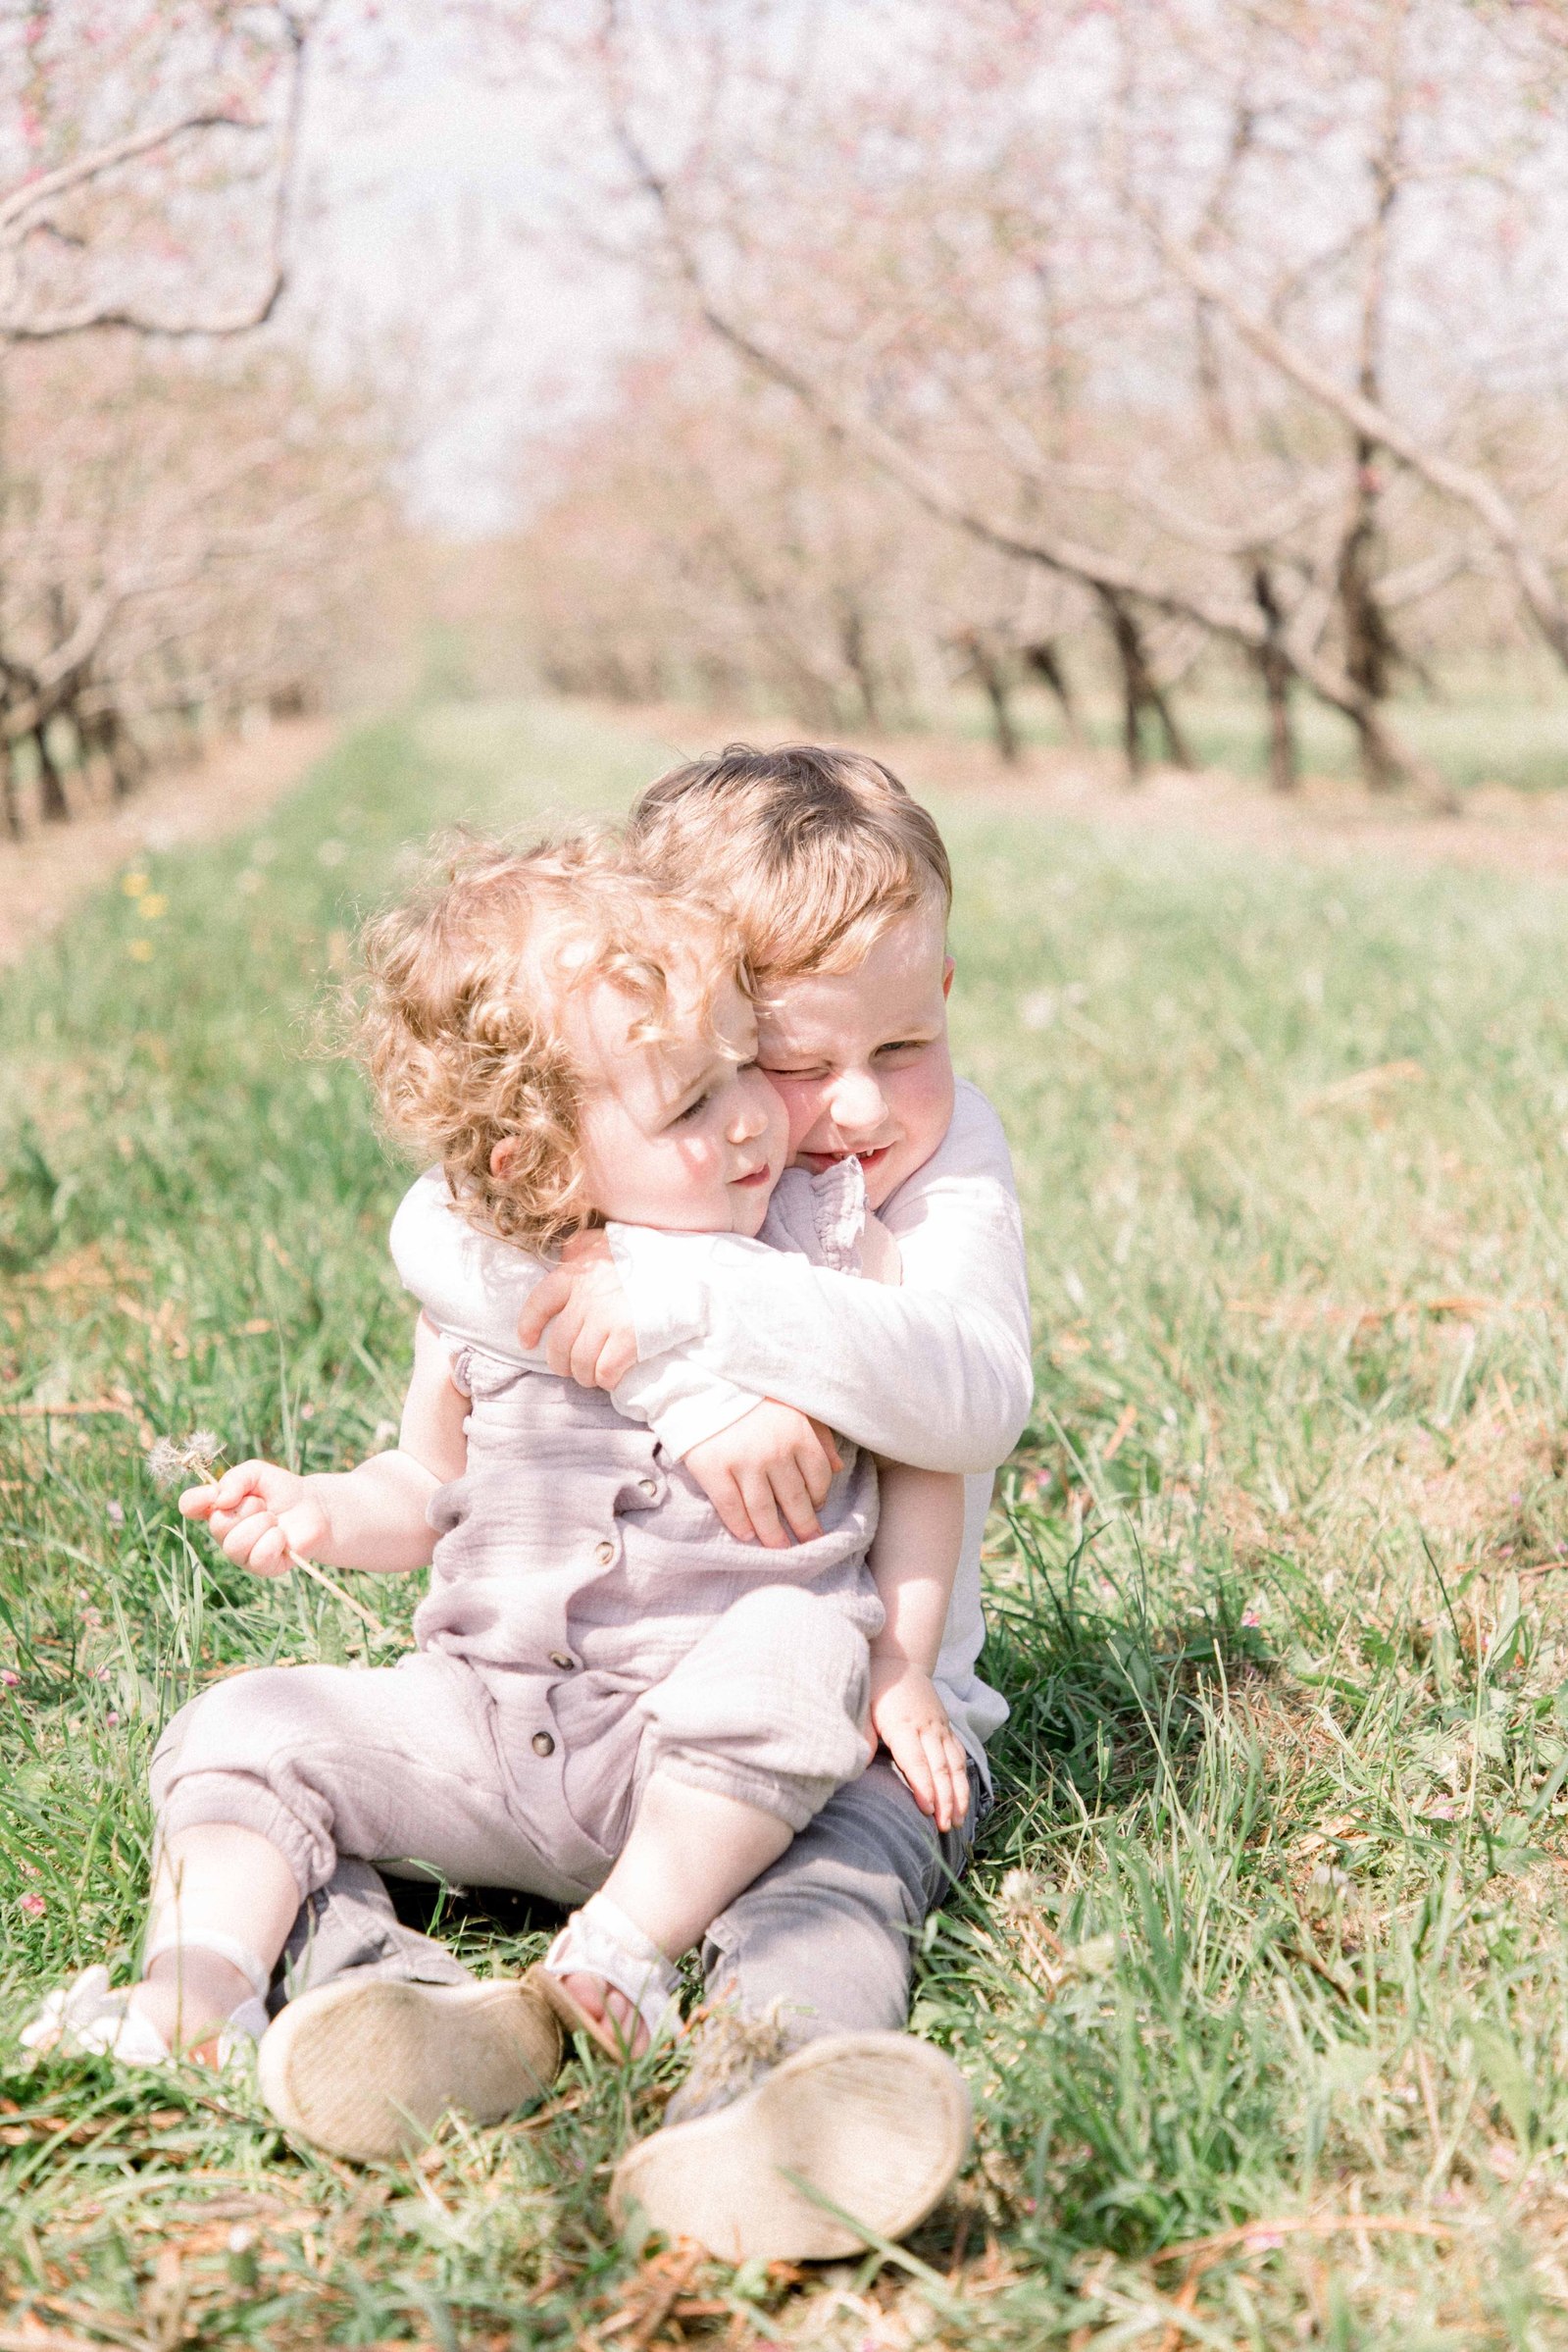 Portrait of brother and sister hugging and smiling in an orchard of fruit blossoms. Niagara Family Photographer, Niagara Portrait Photographer, Niagara Motherhood Photographer. Emily VanderBeek Photography, Emily VanderBeek Photo.